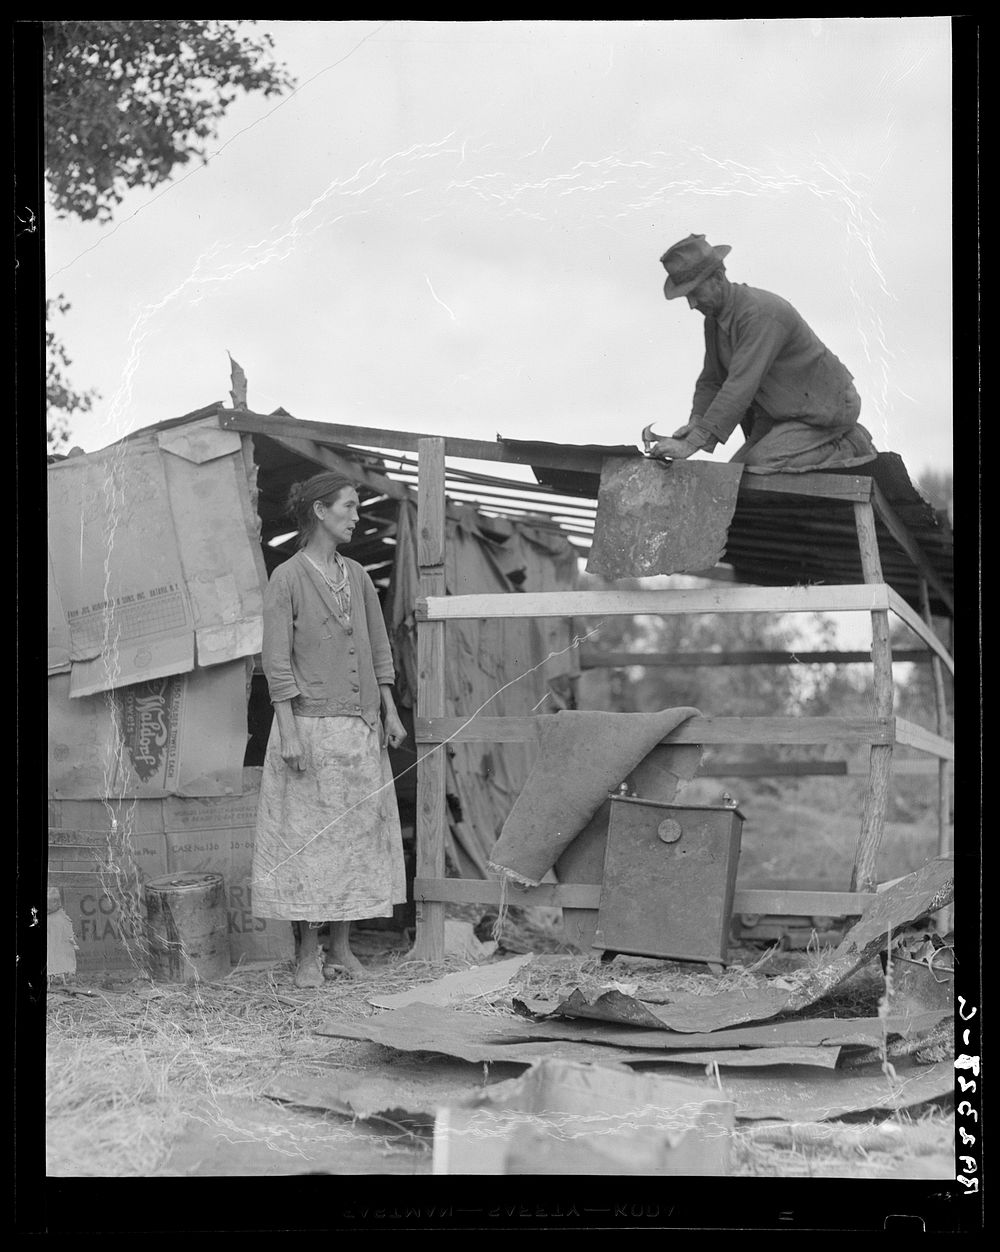 Dispossessed Arkansas farmers. Bakersfield, California. Sourced from the Library of Congress.